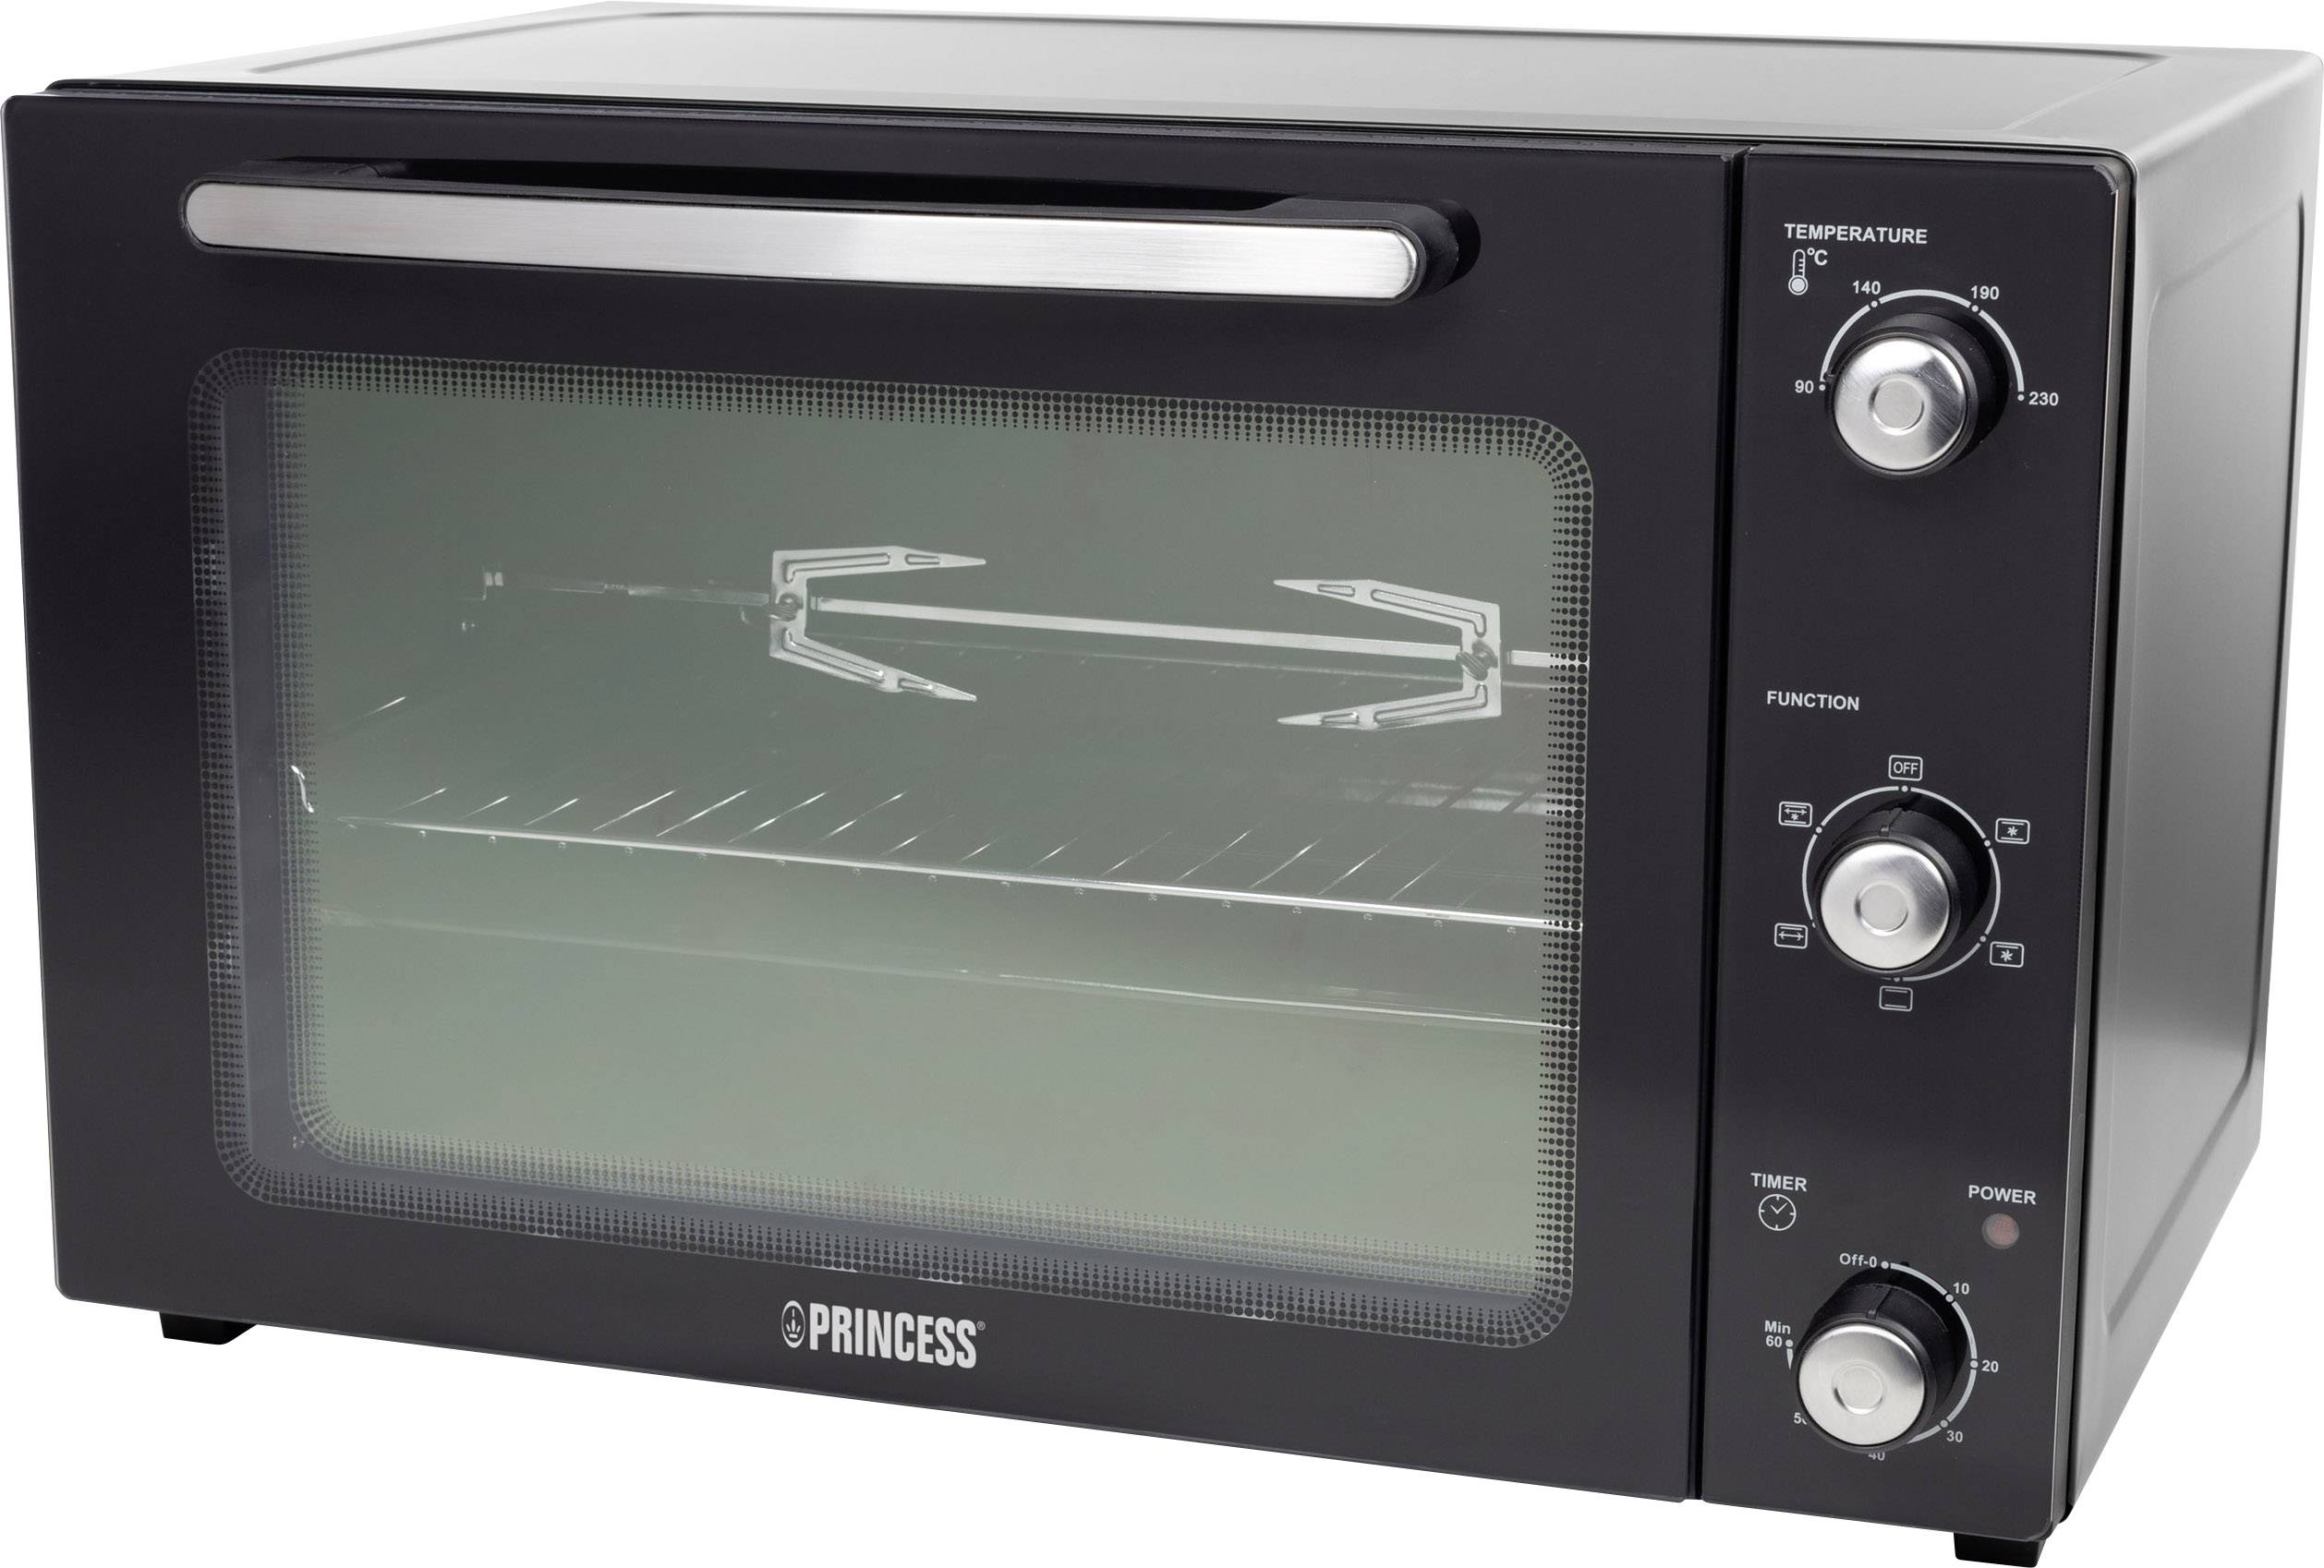 mate logboek optie Princess 01.112761.01.001 Mini oven with manual temperature settings, Timer  fuction, with convection, corded 55 l | Conrad.com